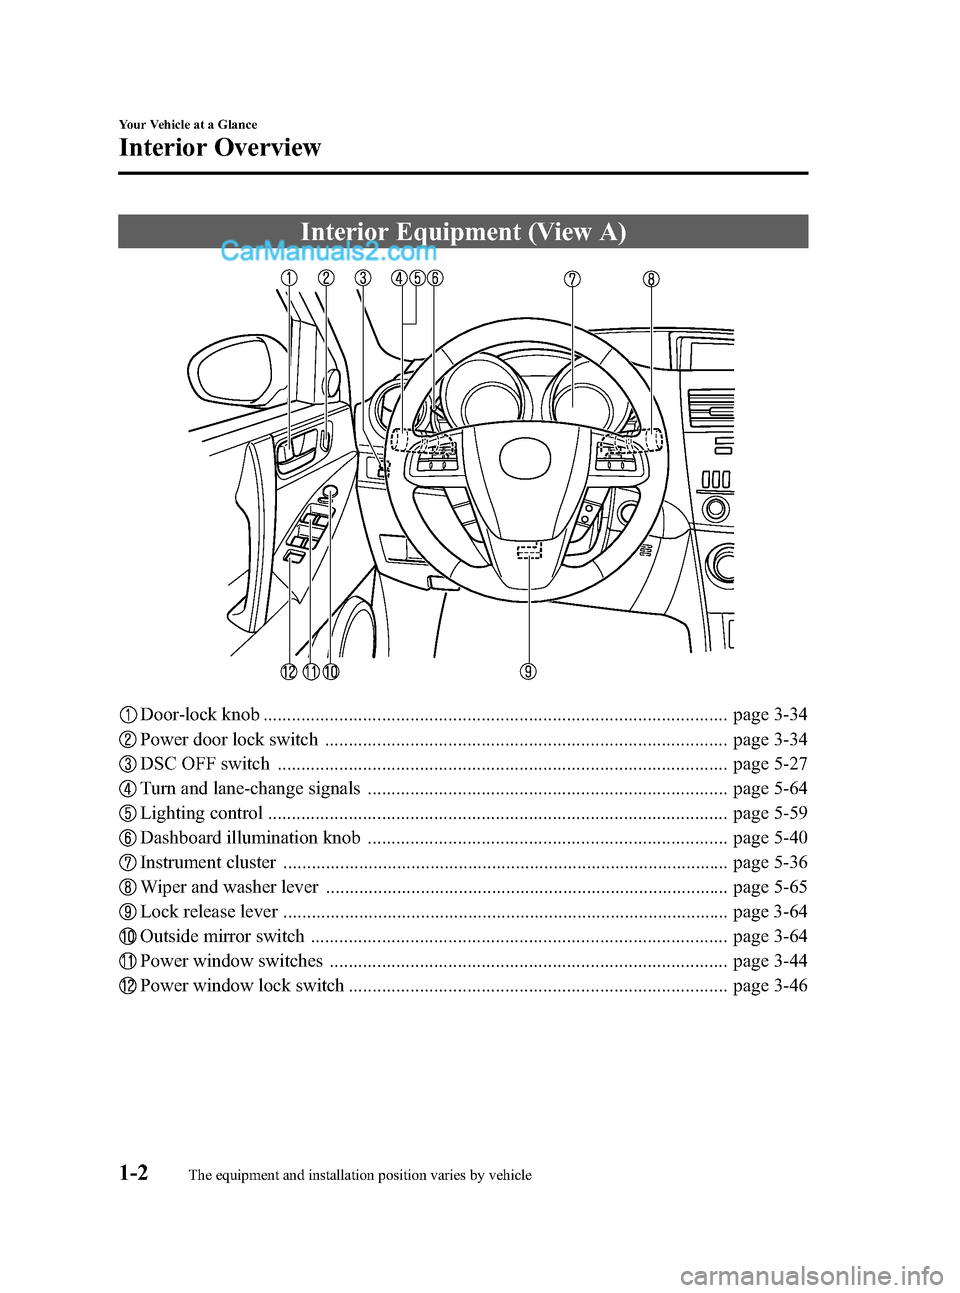 MAZDA MODEL MAZDASPEED 3 2011  Owners Manual (in English) Black plate (8,1)
Interior Equipment (View A)
Door-lock knob .................................................................................................. page 3-34
Power door lock switch .......